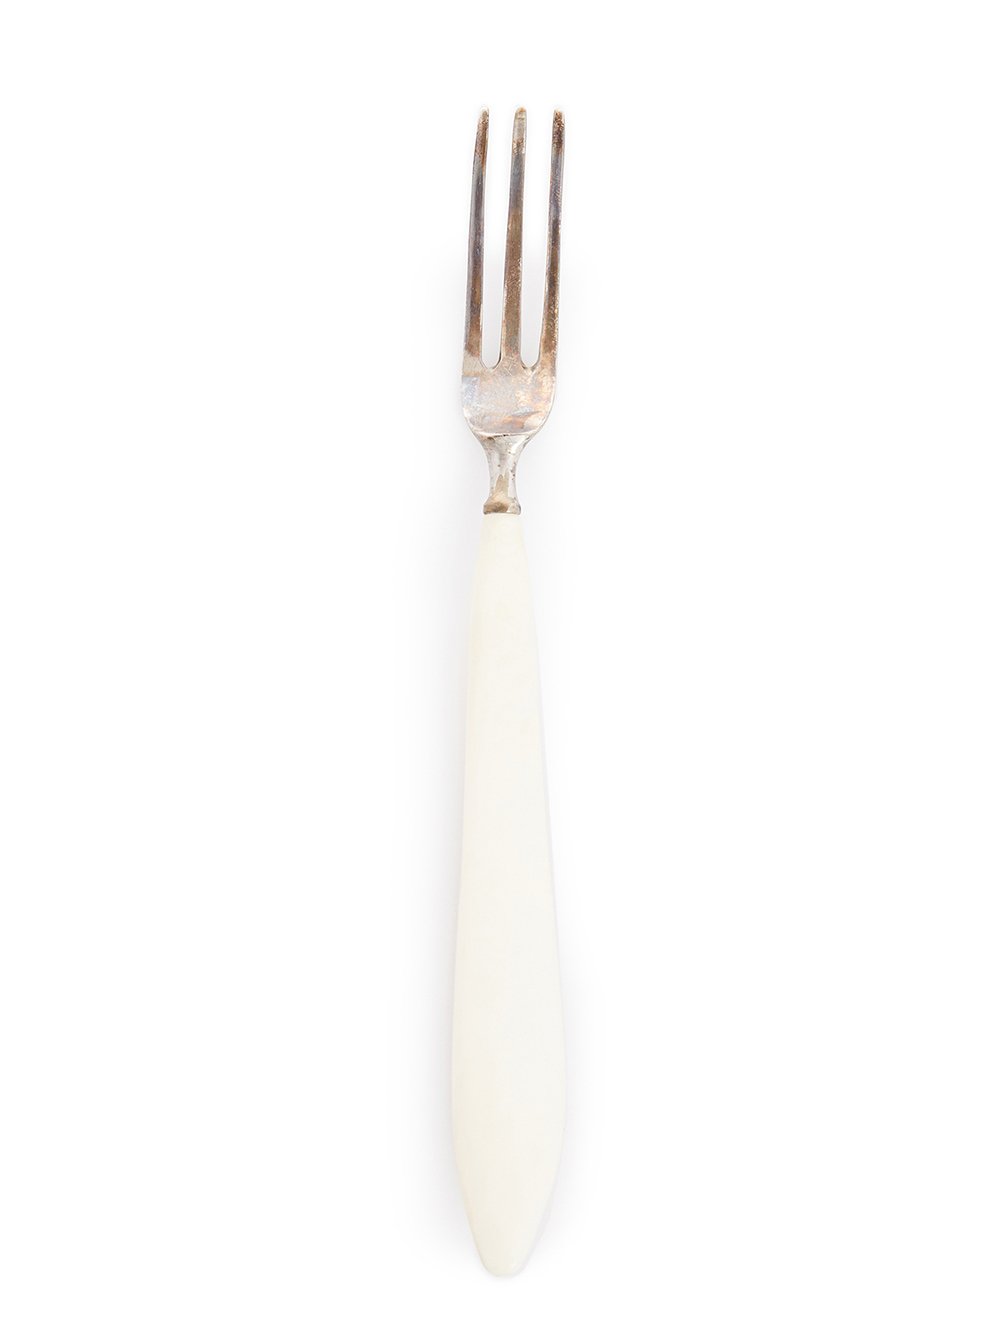 RICK OWENS DESSERT FORK FEATURES A THREE TINE STERLING SILVER TOP AND A NATURAL COLOR BONE HANDLE.